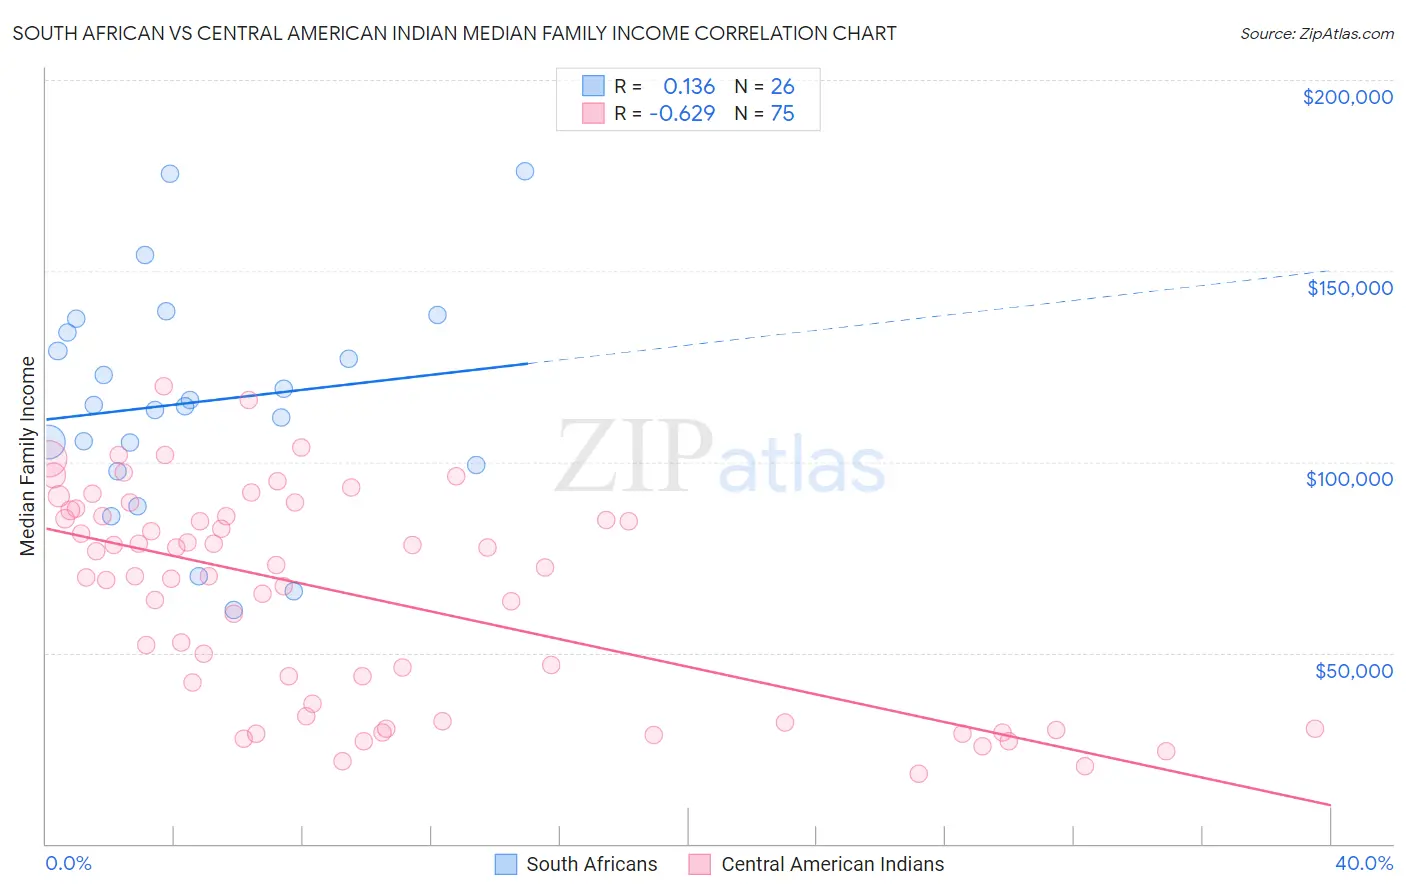 South African vs Central American Indian Median Family Income